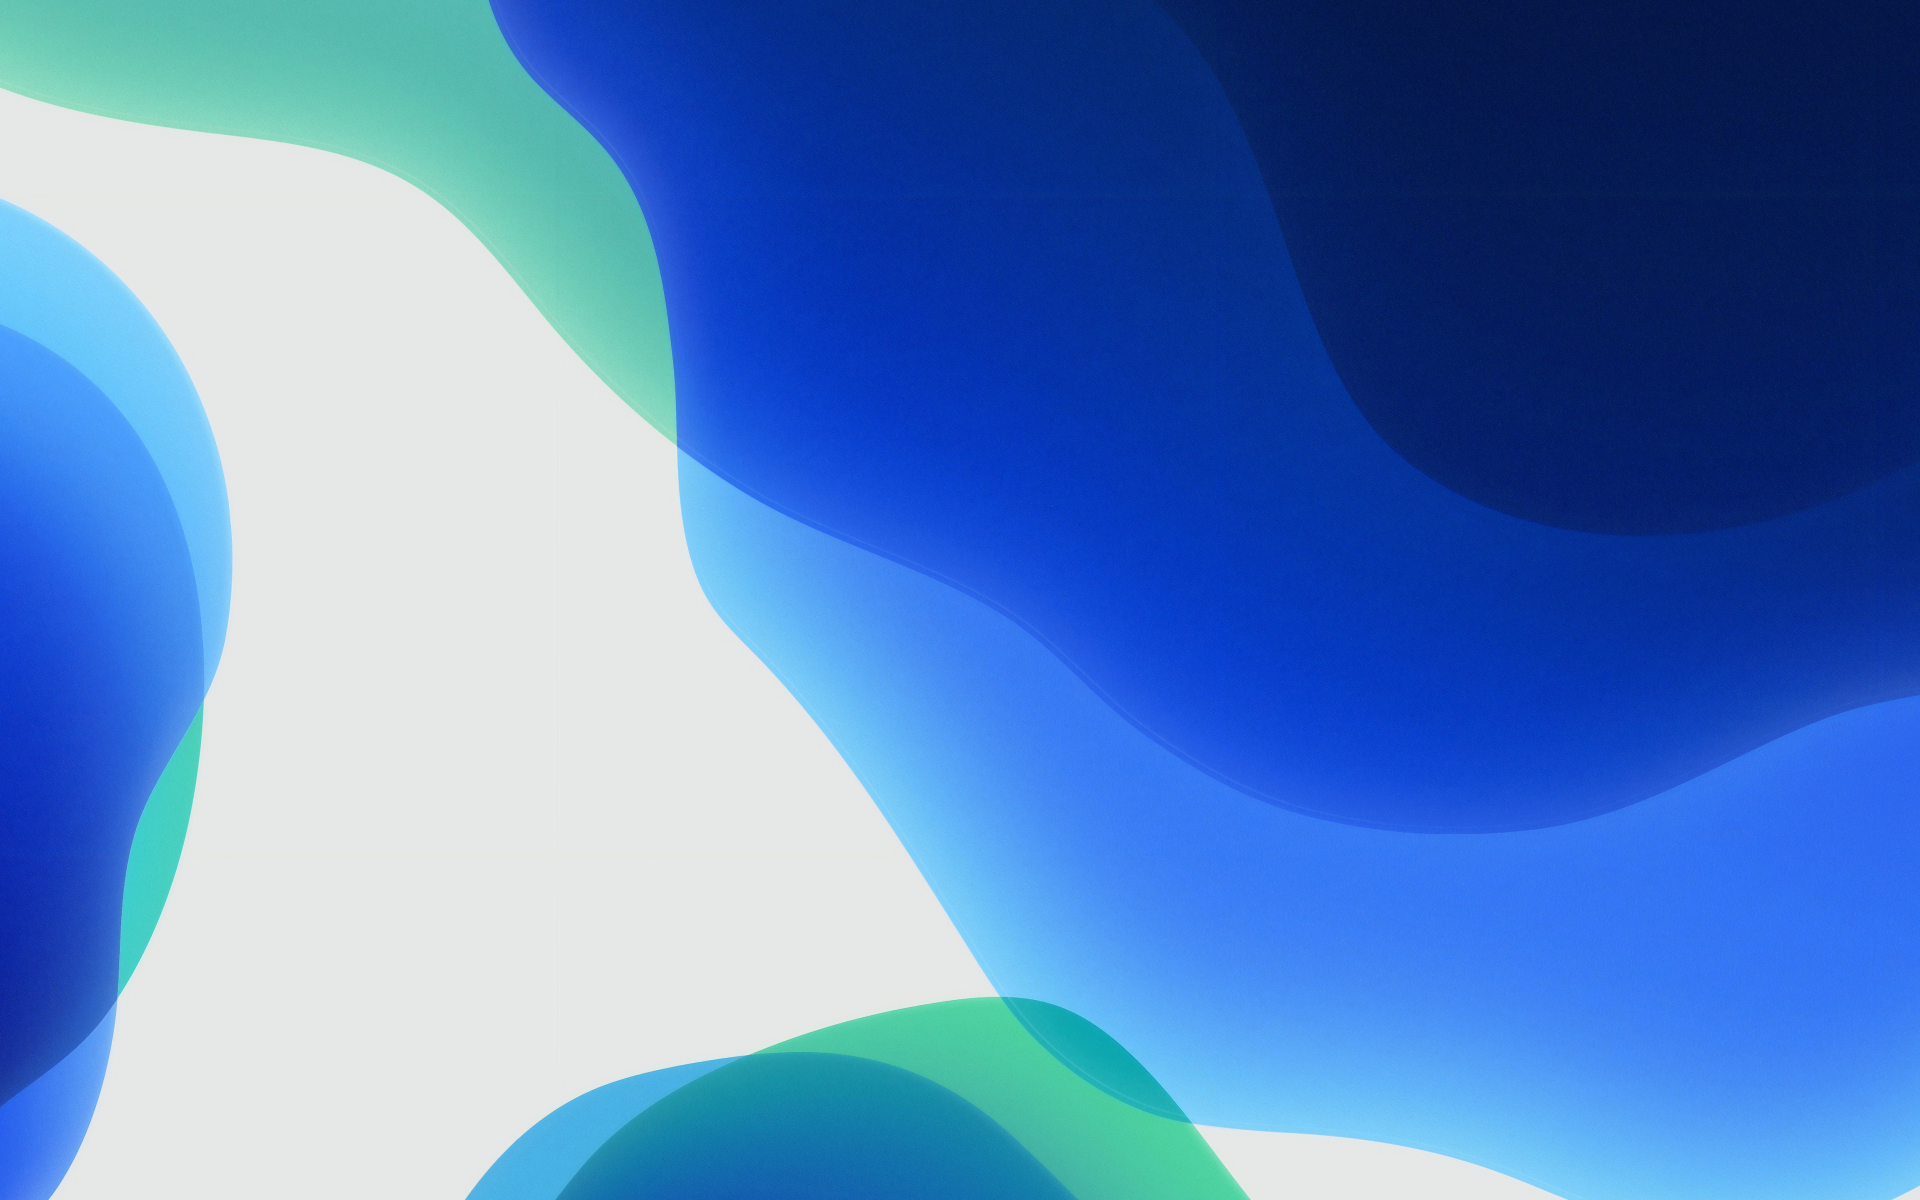 1920x1200 Blue and Light iOS 13 1200P Wallpaper, HD Abstract 4K ...